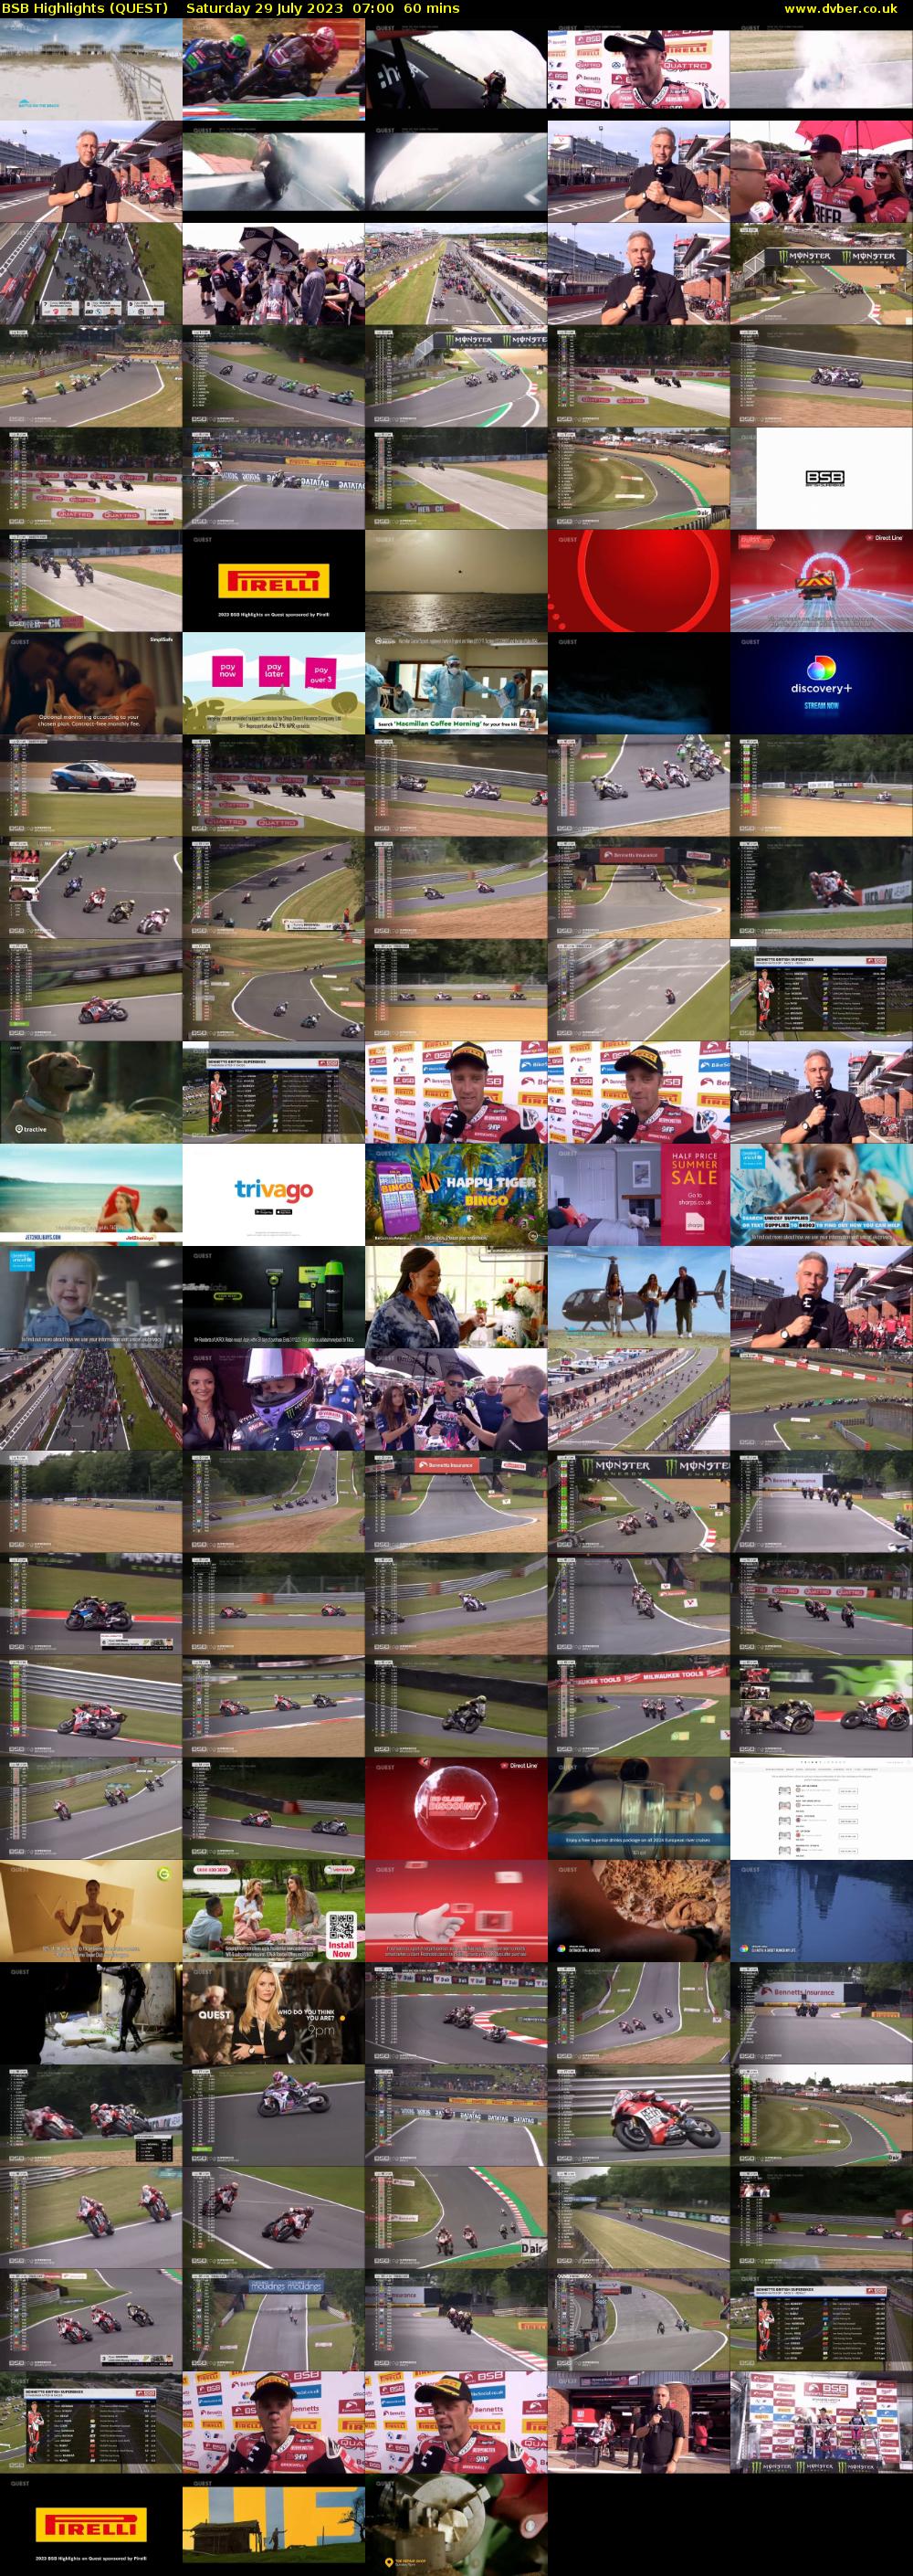 BSB Highlights (QUEST) Saturday 29 July 2023 07:00 - 08:00